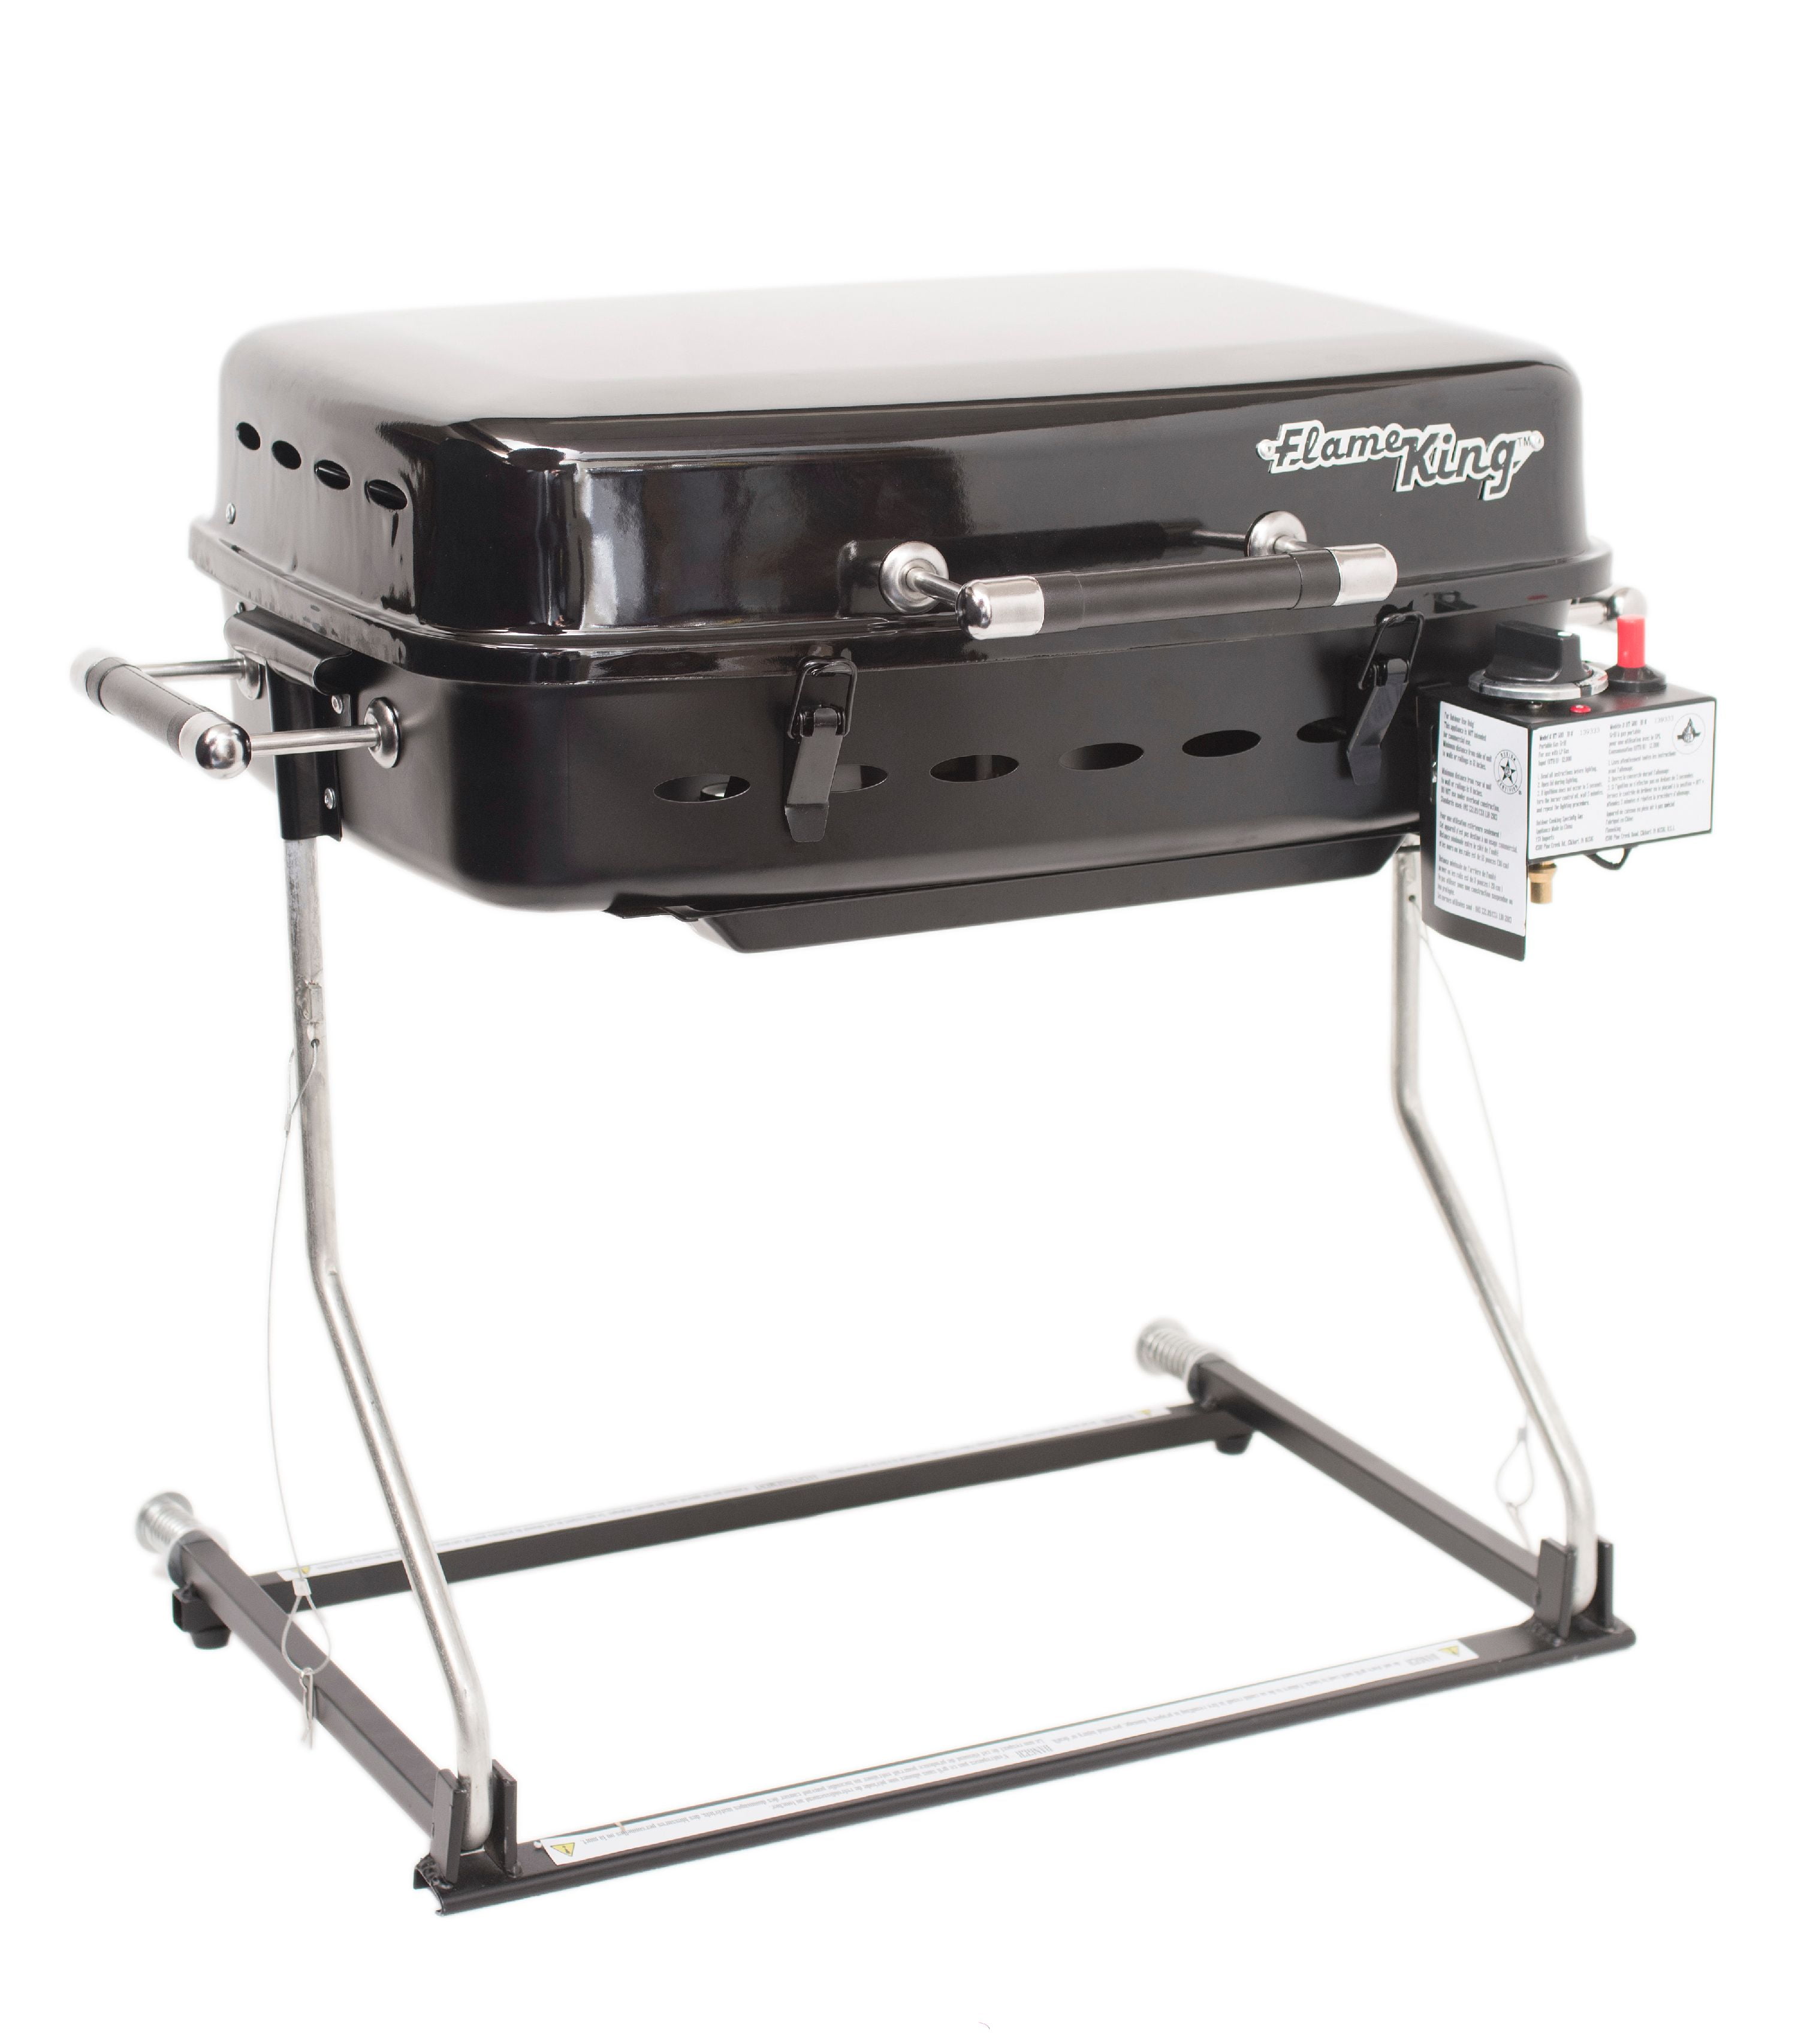 Recipes Combined BBQ Smoker and Trailer Plans CD 